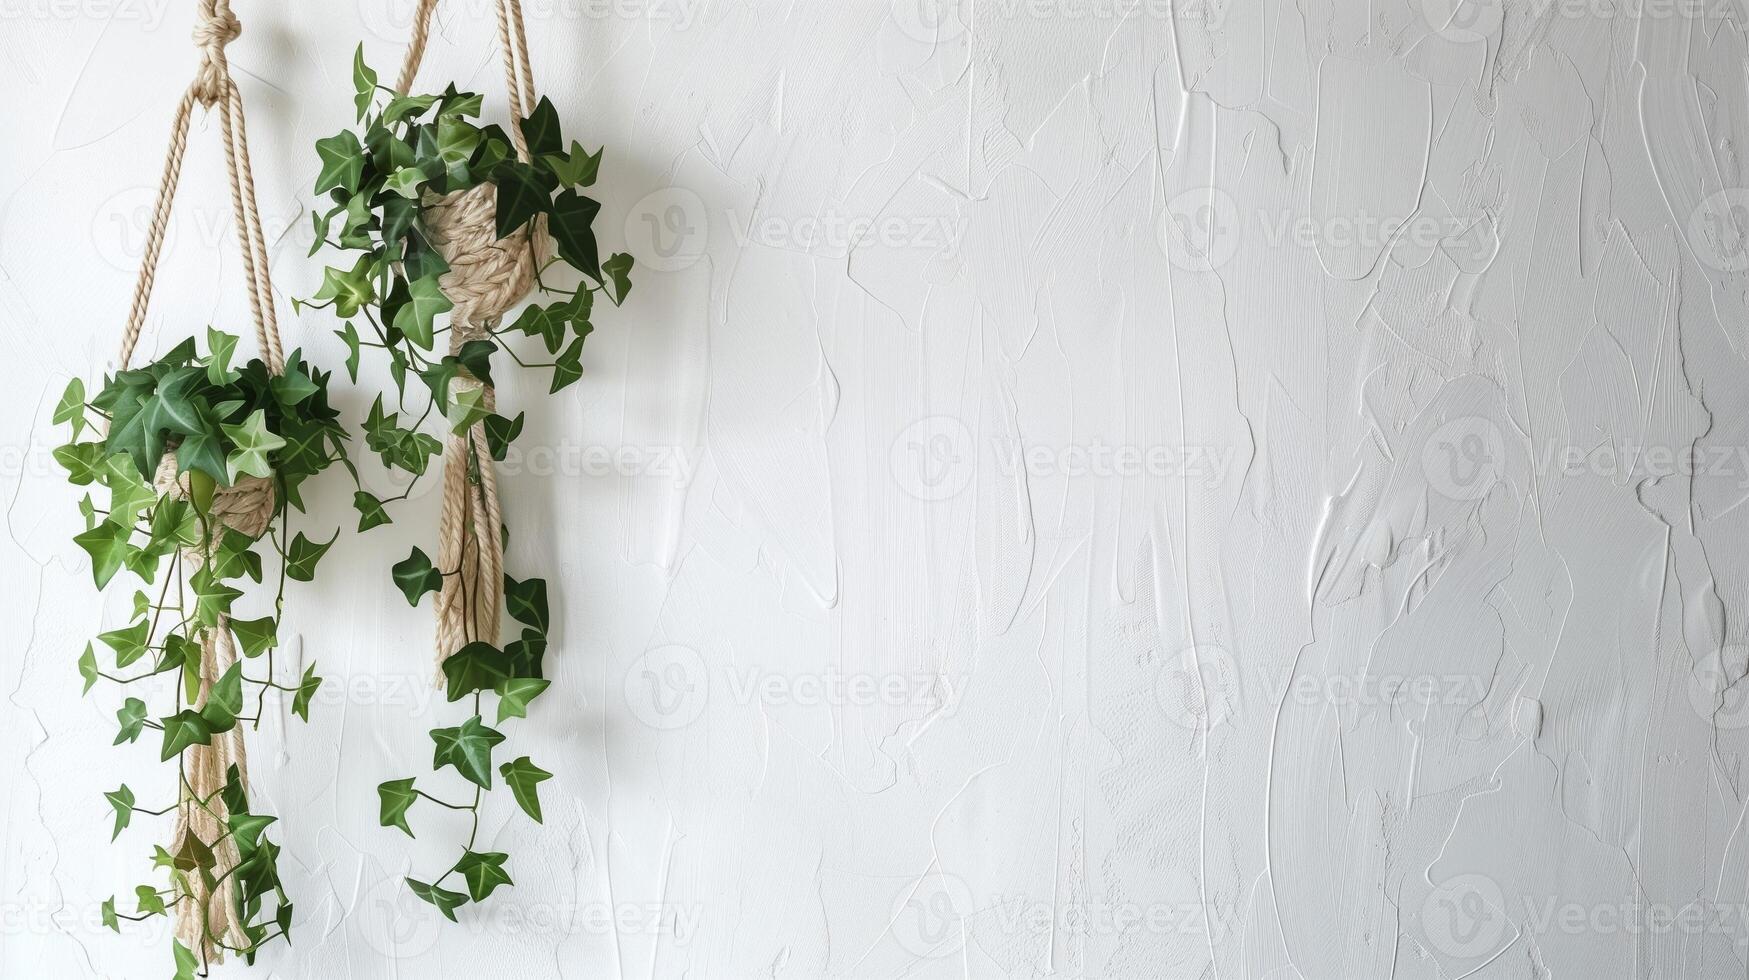 macrame plant hangers displaying green ivy, white wall background with empty space for text photo